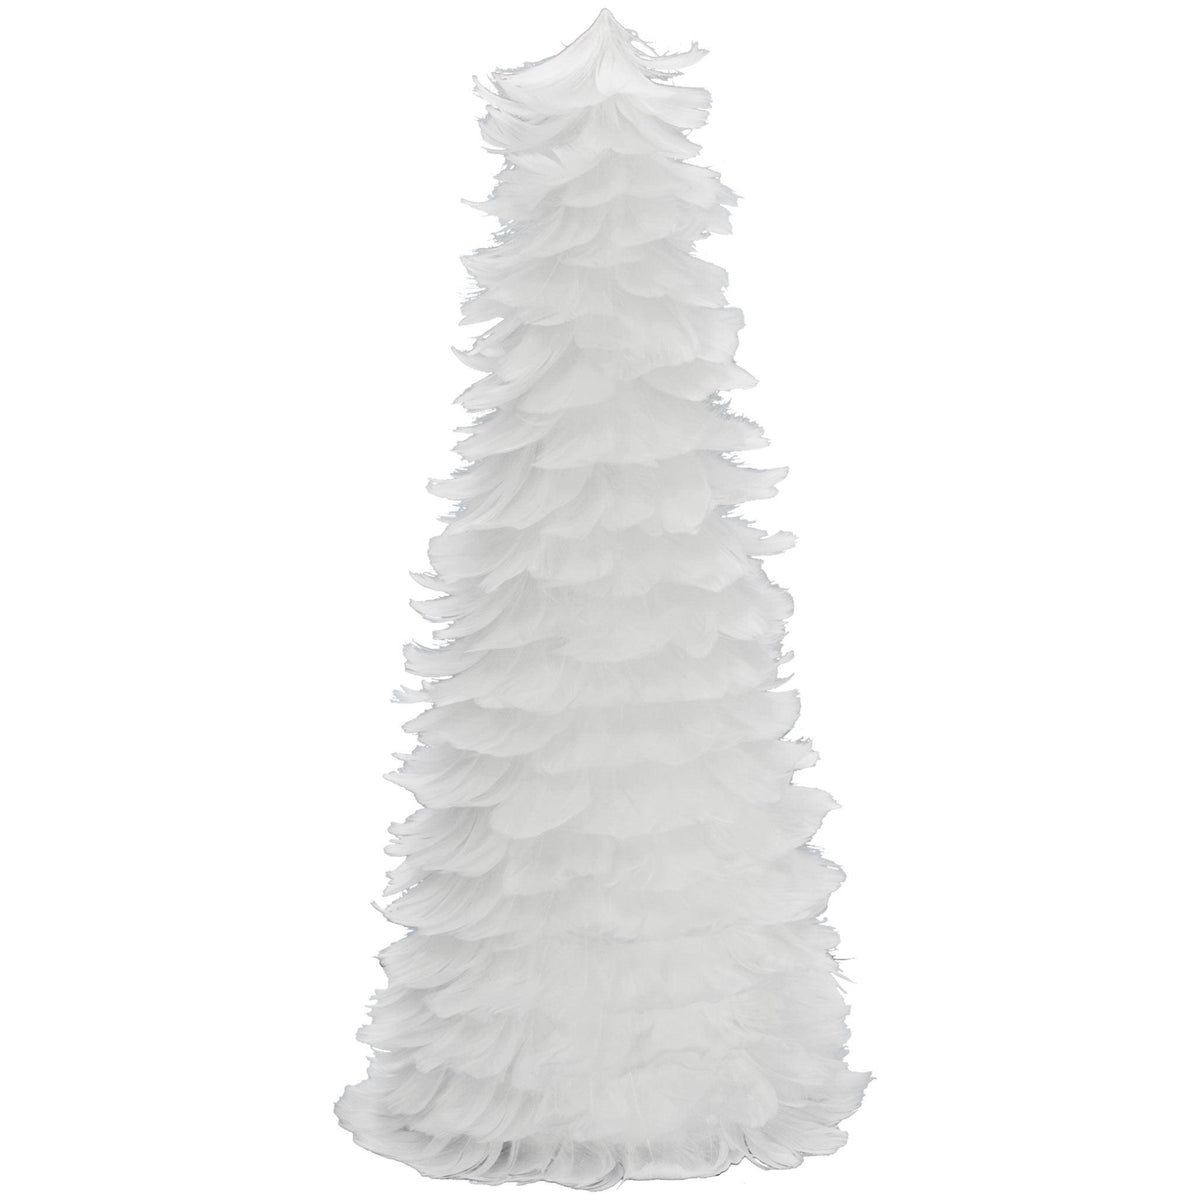 Introducing Lee Display's brand new White Goose Feather Christmas Tree Cones! Made with real Goose feathers. Details: 18in Height Bottom Diameter 9in Weighs approx. 3oz